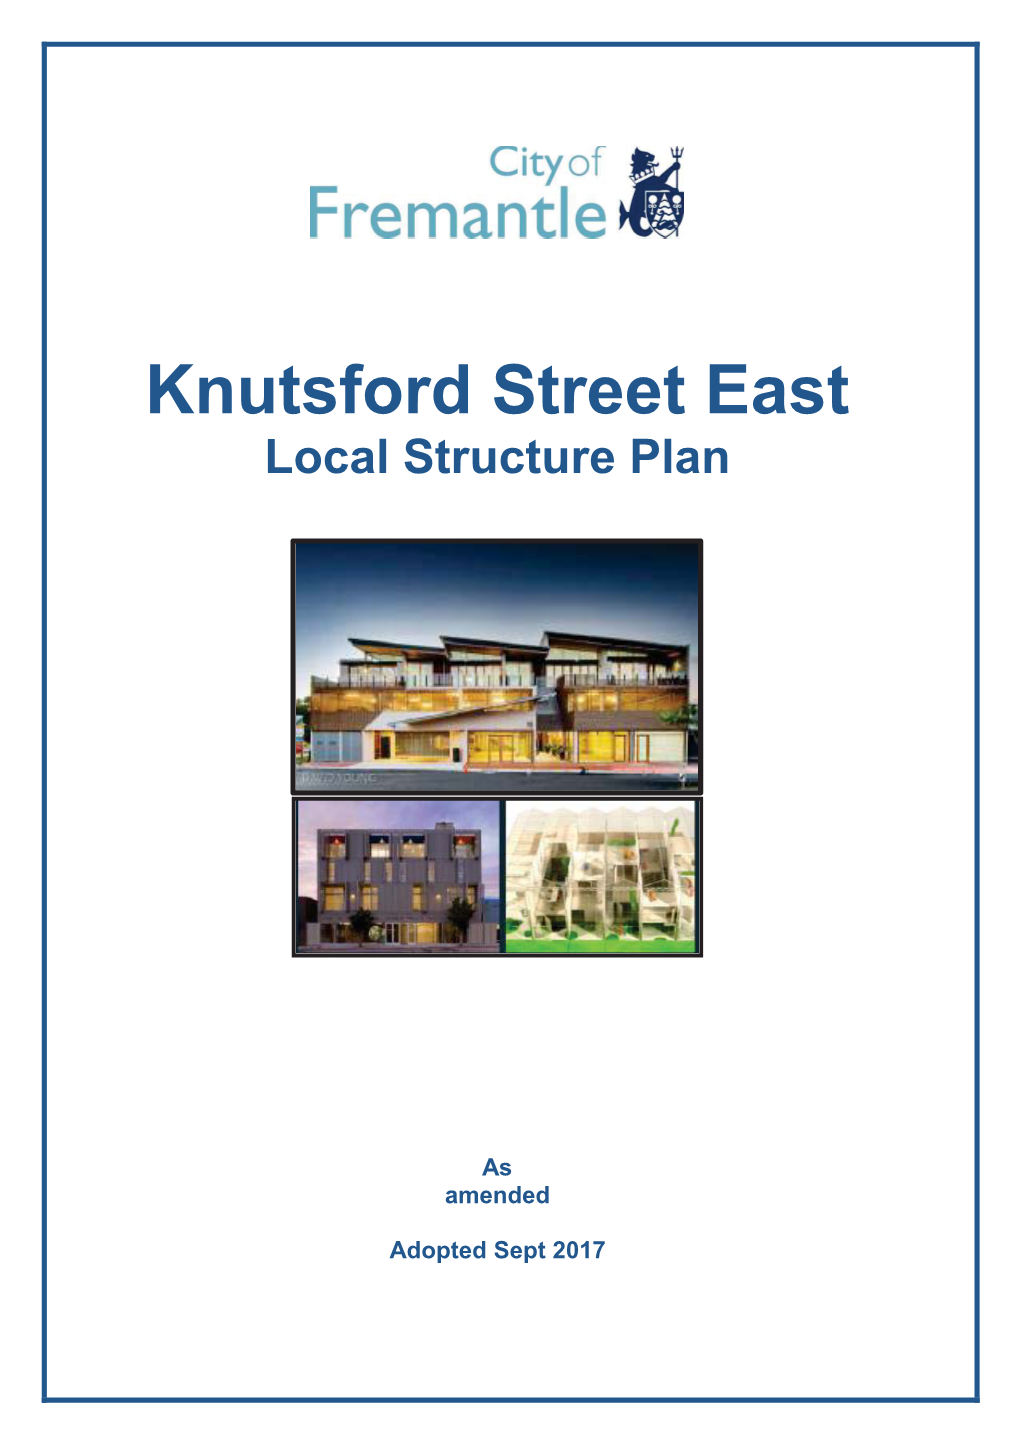 Knutsford Street East Structure Plan Has Been Prepared in Accordance with the Requirements of Clause 6.2.6 of LPS 4 for the Preparation of a Local Structure Plan